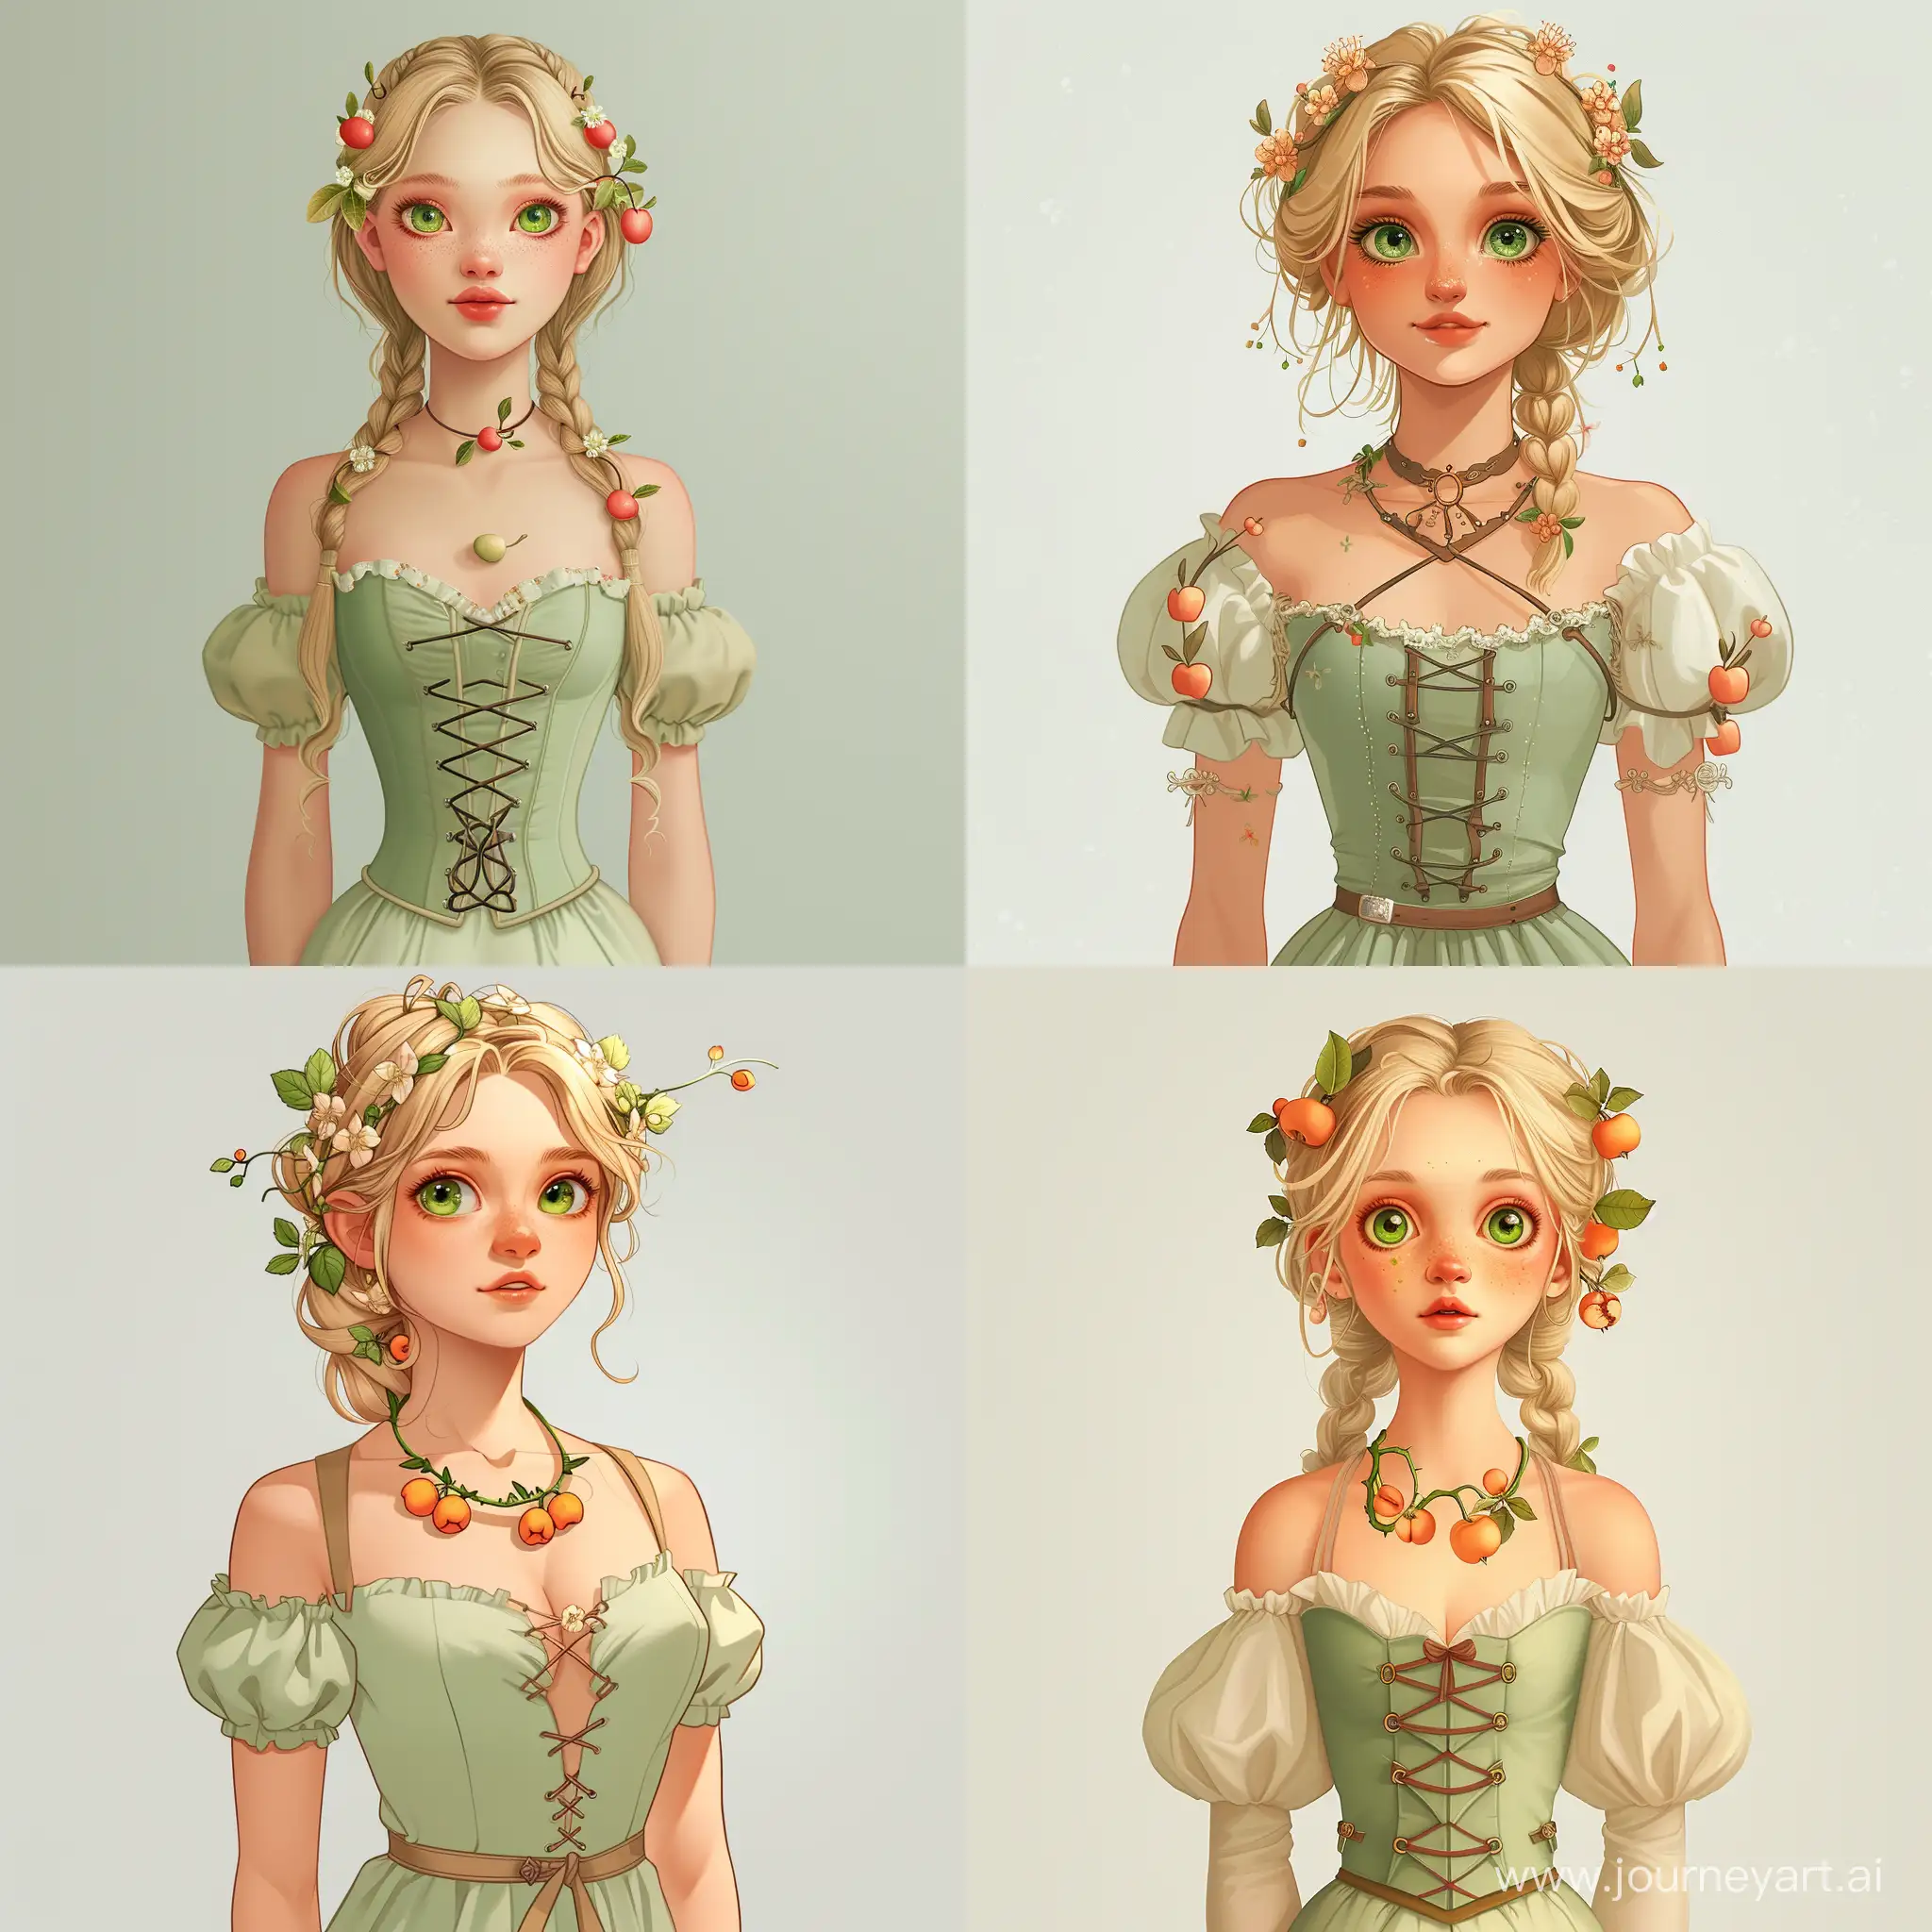 Enchanting-Blonde-Girl-with-Apple-Blossoms-Whimsical-Portrait-in-Light-Green-Corset